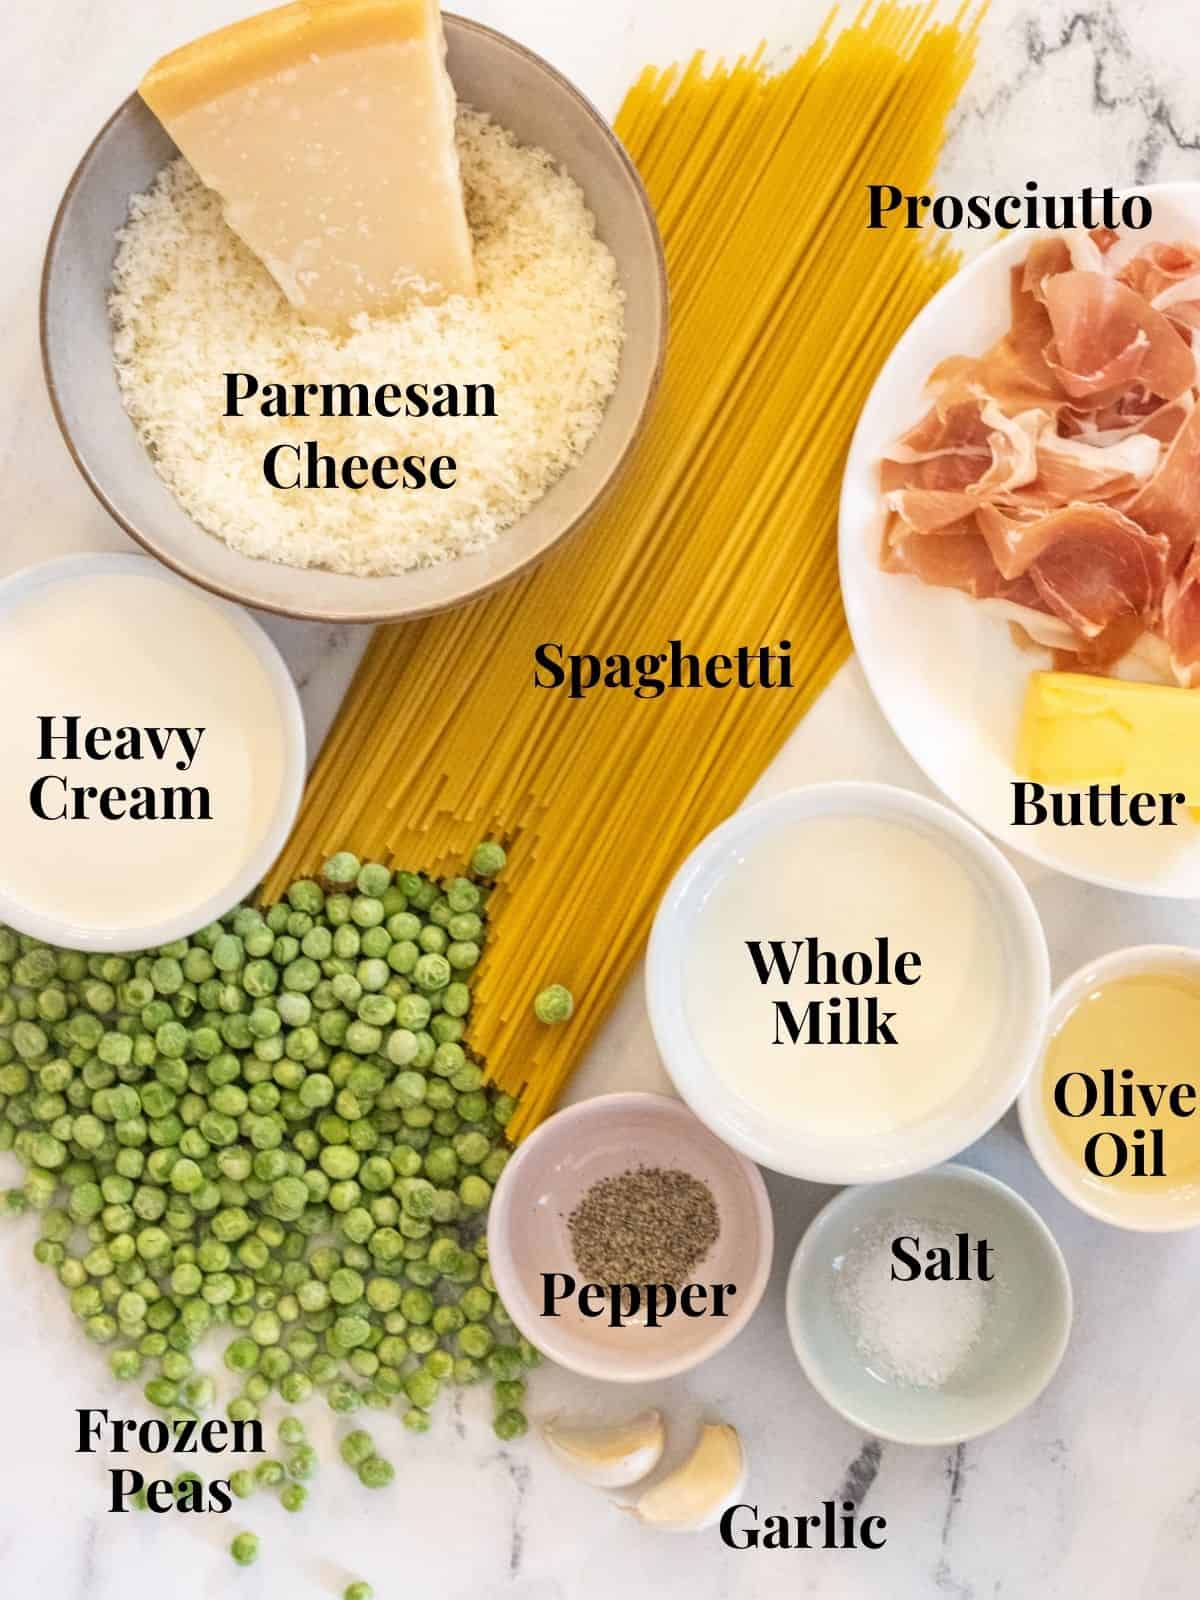 Ingredients for spaghetti Alfredo with crispy prosciutto and peas laid out and labeled.